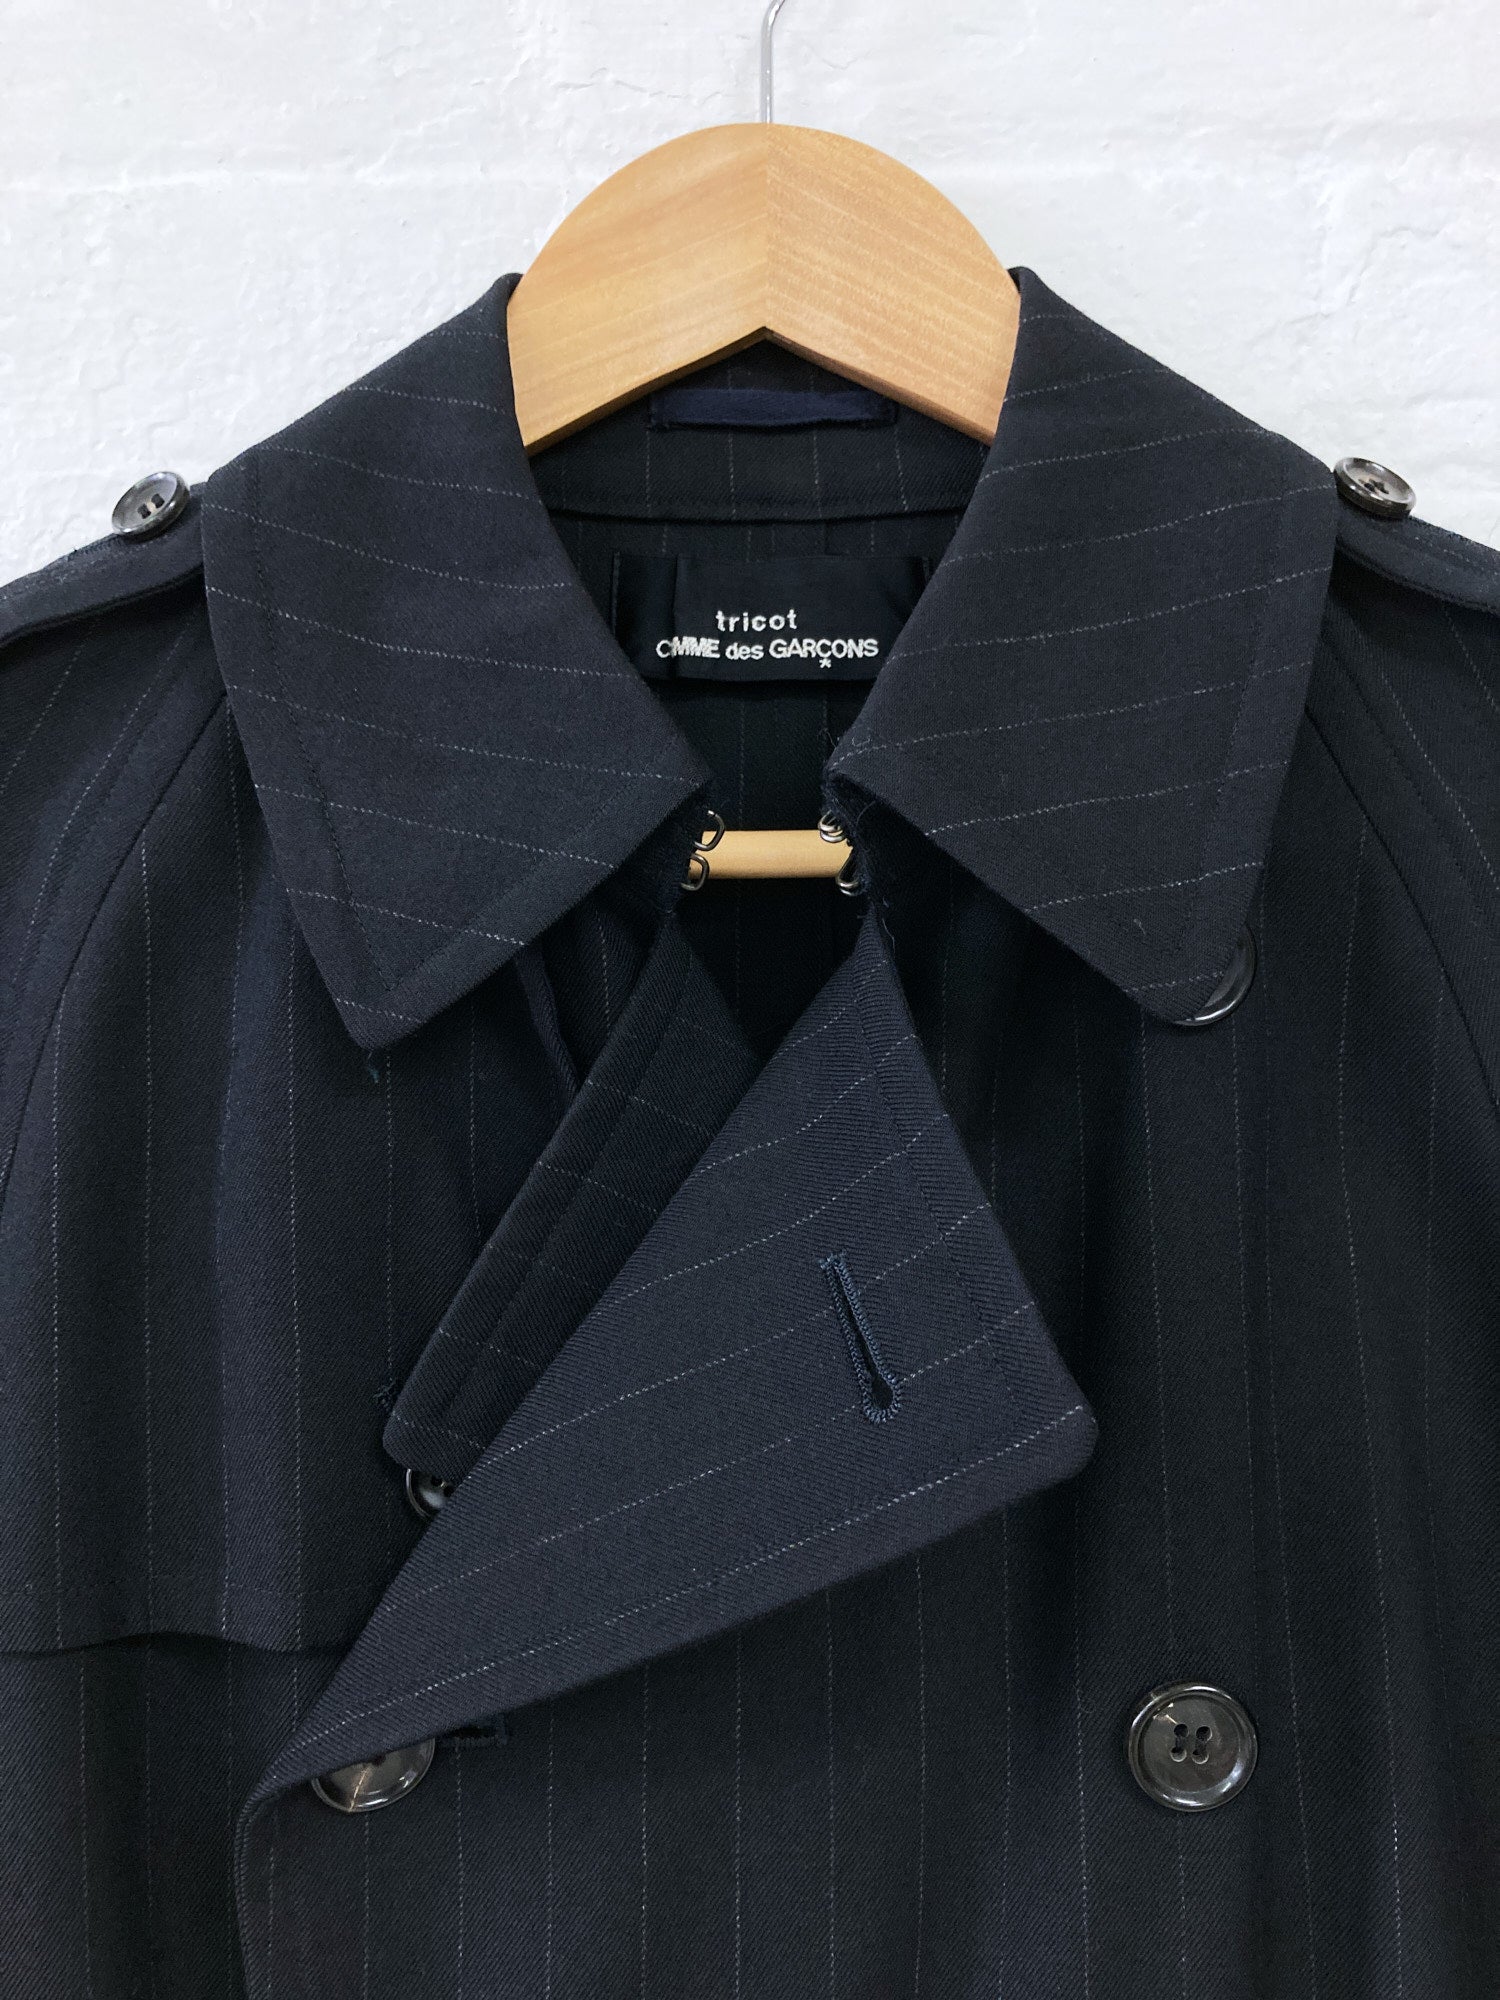 Tricot Comme des Garcons 1998 dark navy striped wool trench coat